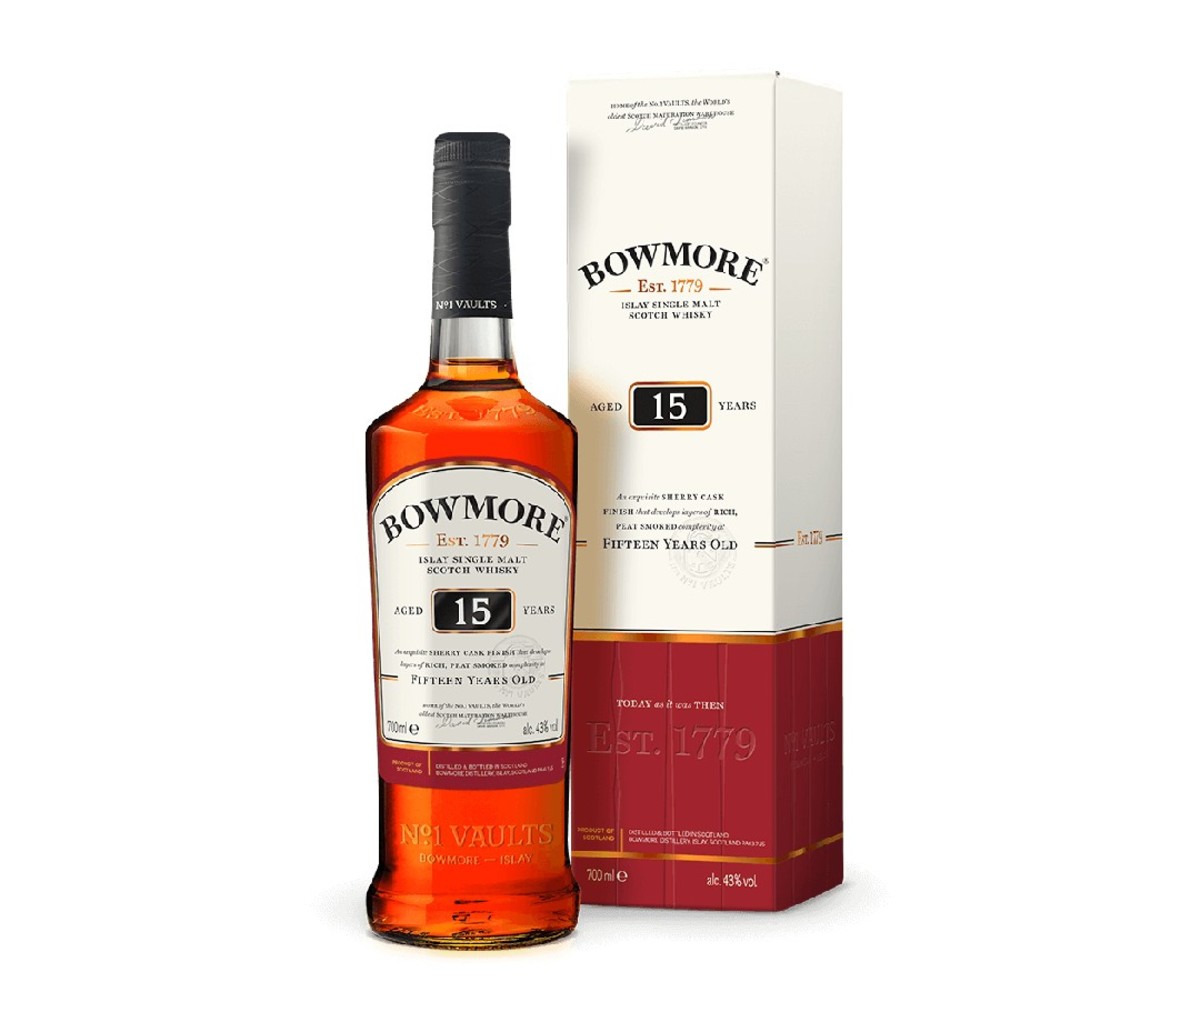 A bottle of Bowmore 15 Year Old whisky.